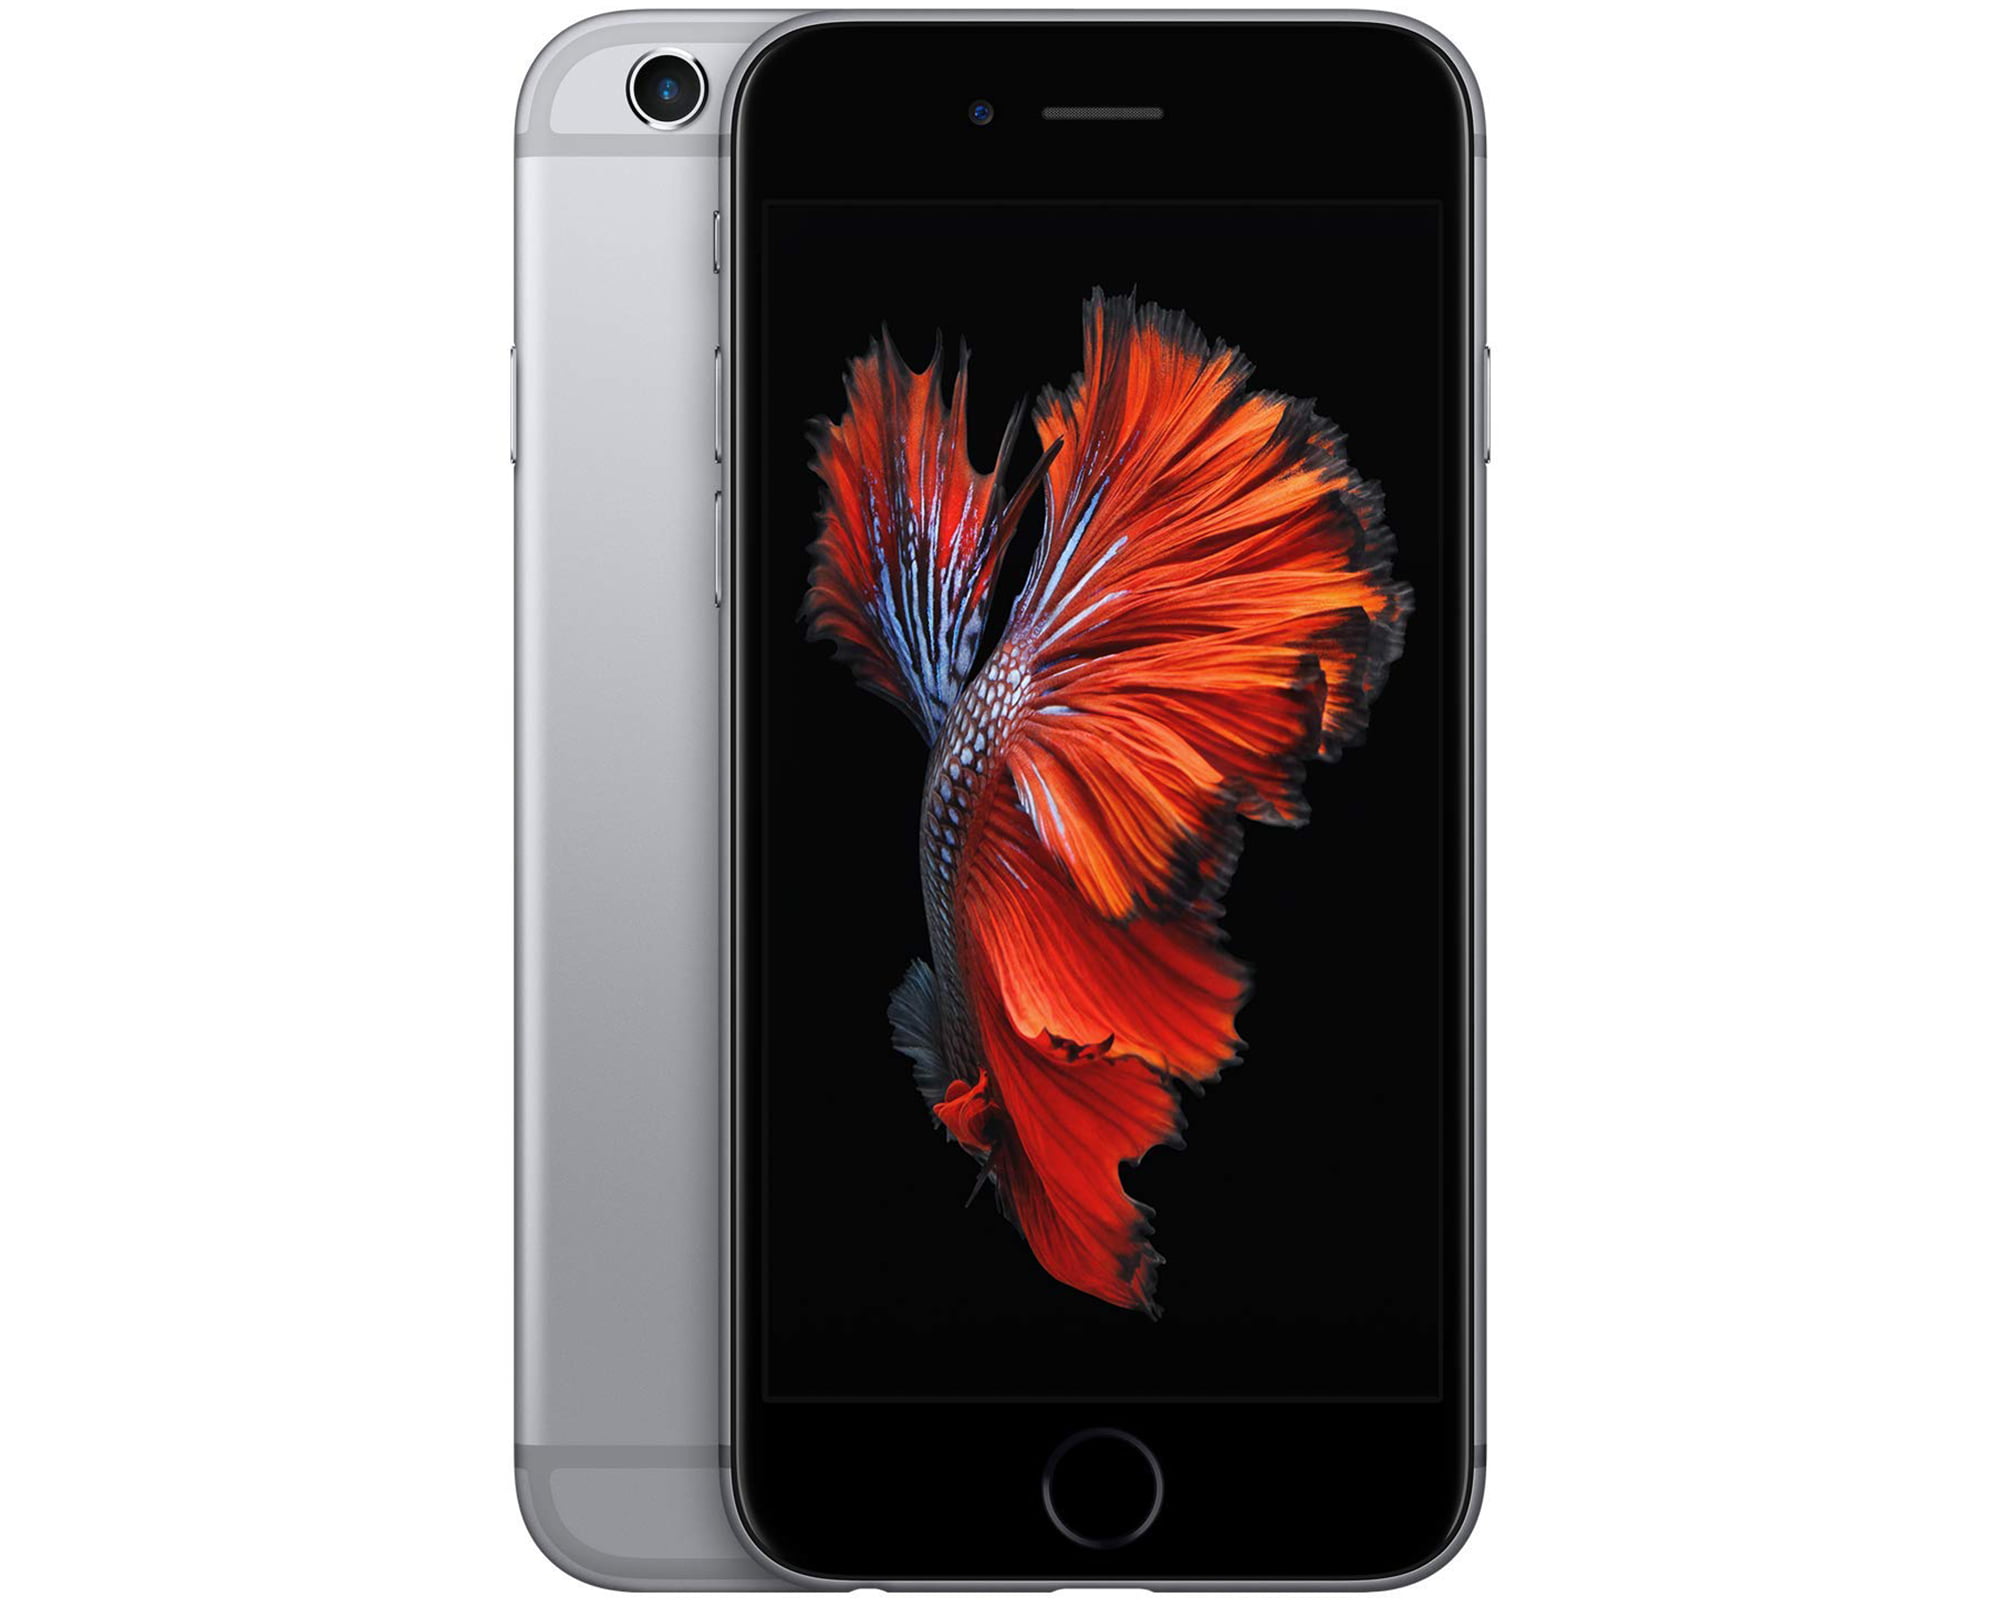 Apple Stores will send some iPhone 6/6s phones for off-site repairs,  offering 16GB loaners - 9to5Mac